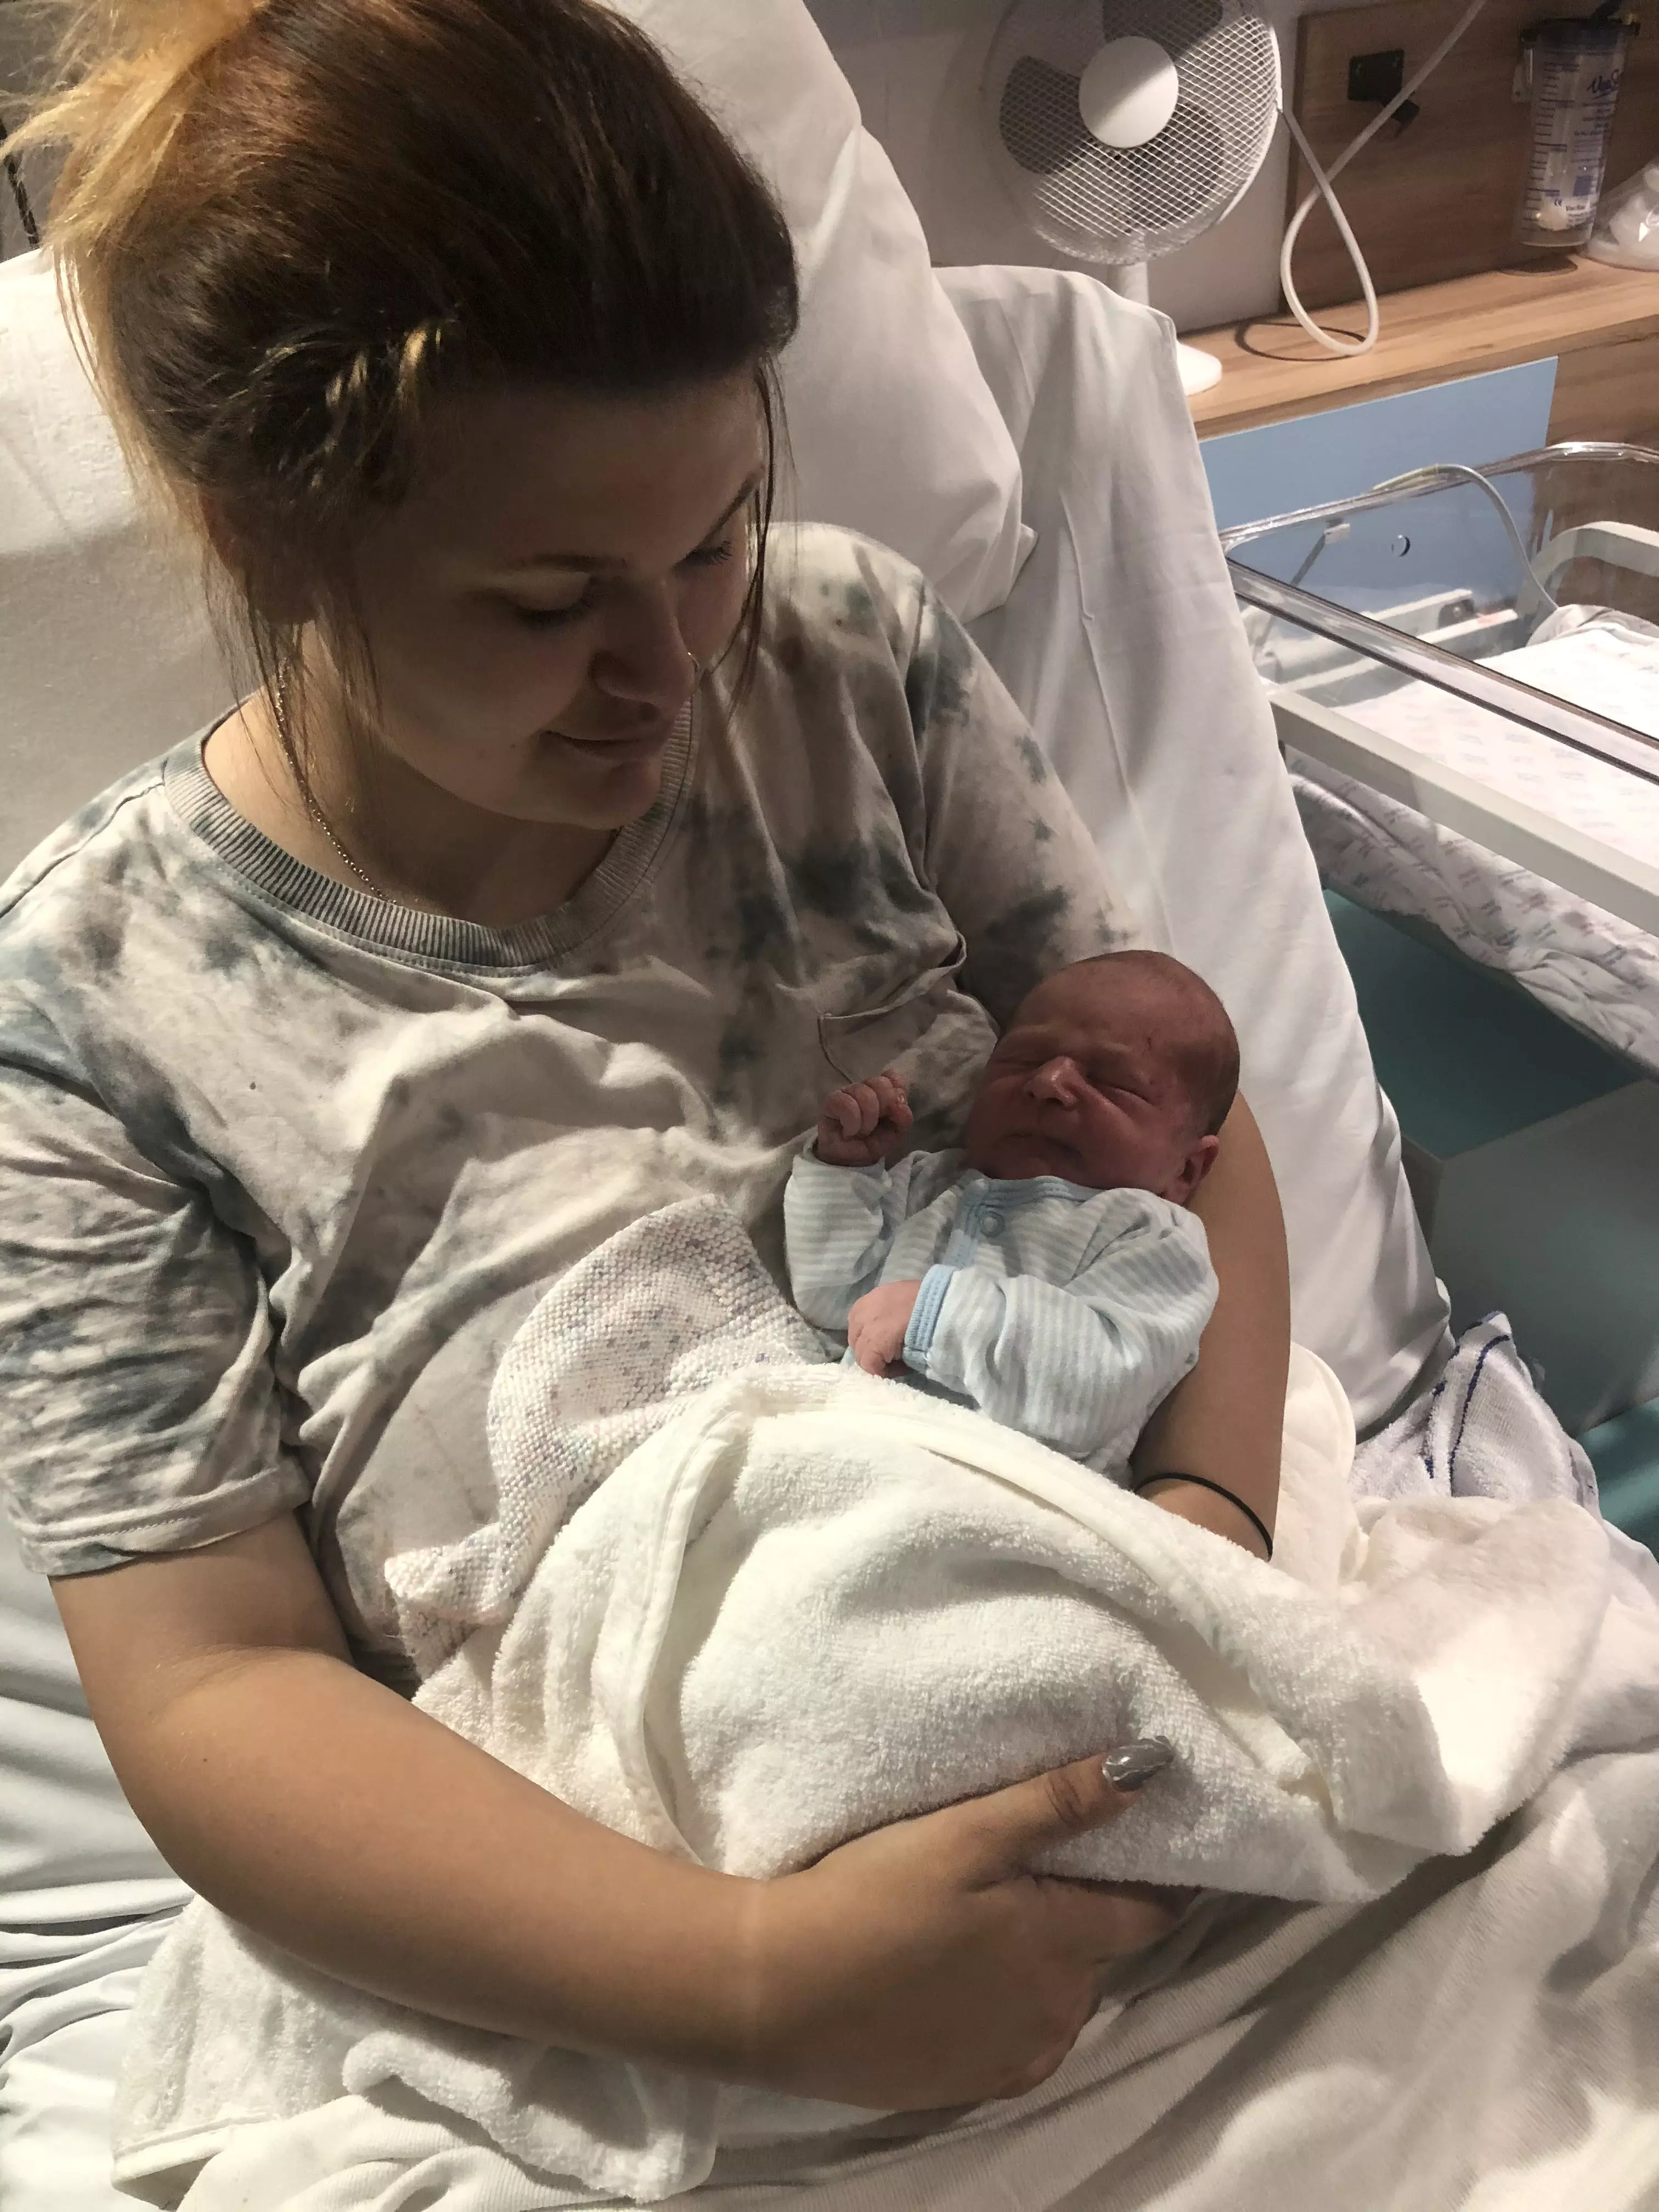 Aimee gave birth just days after finding out she was pregnant (